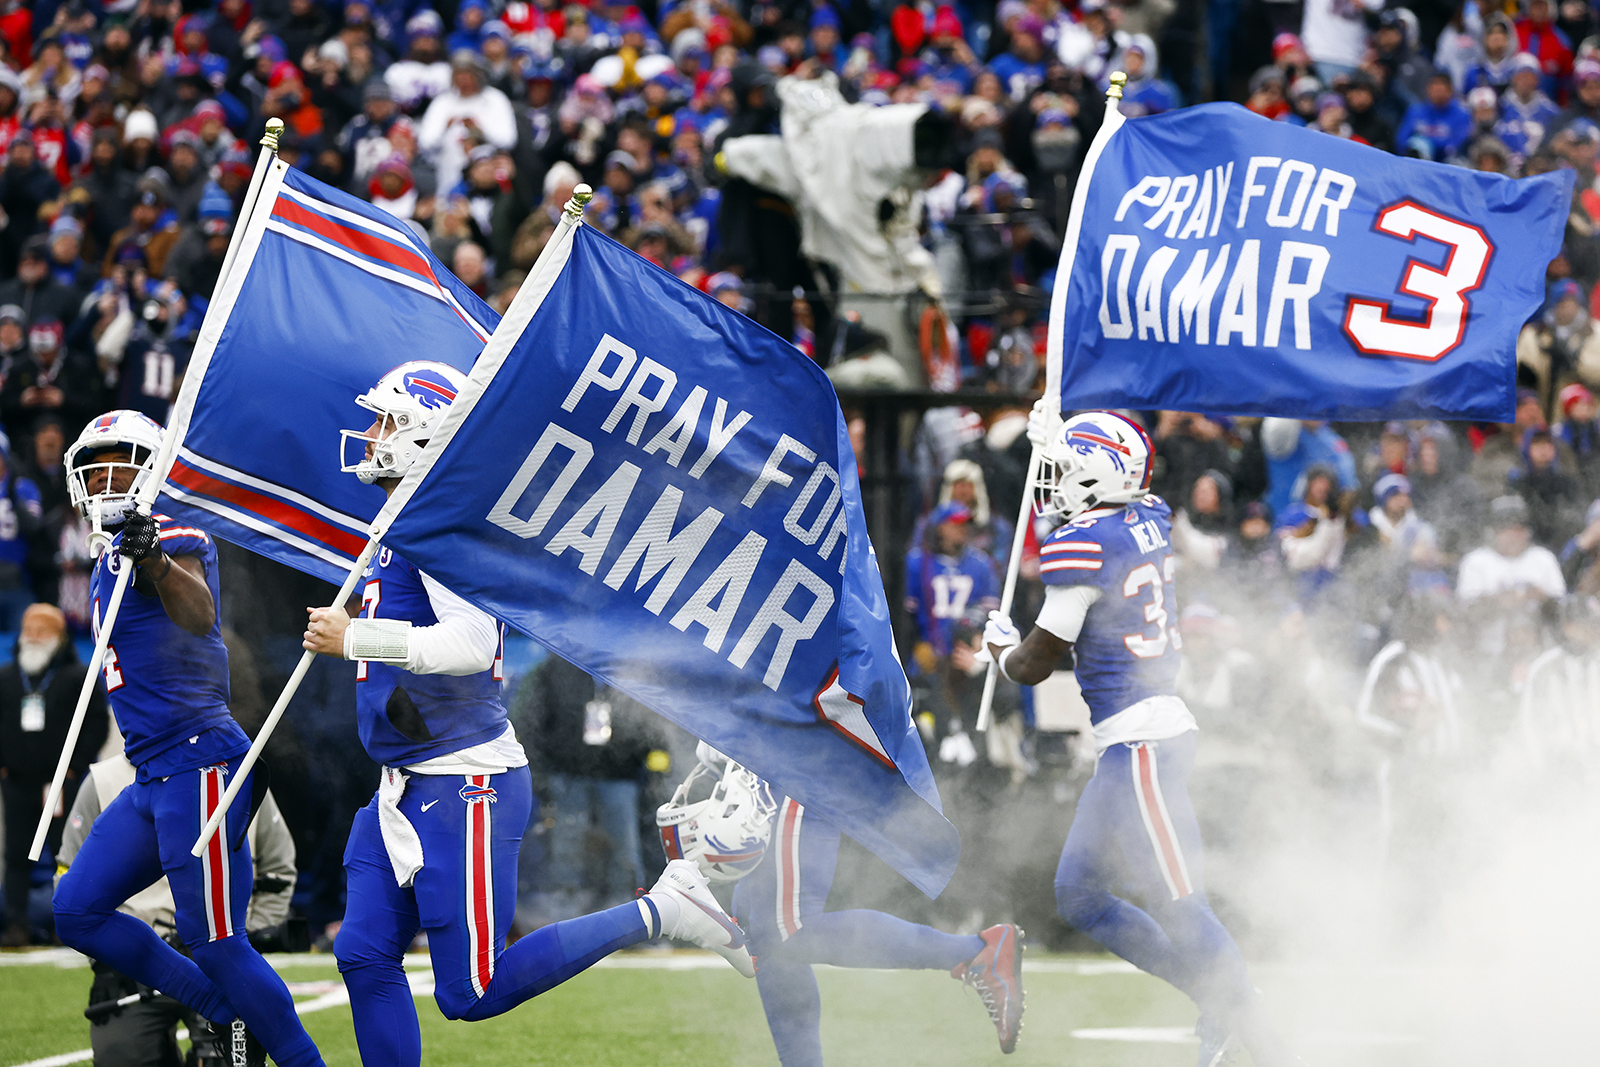 The Buffalo Bills carry flags onto the field reading "Pray for Damar" in support of safety Damar Hamlin before an NFL football game against the New England Patriots, Sunday, Jan. 8, 2023, in Orchard Park, N.Y. Hamlin remains hospitalized after suffering a catastrophic on-field collapse in the team's previous game against the Cincinnati Bengals. (AP Photo/Jeffrey T. Barnes)